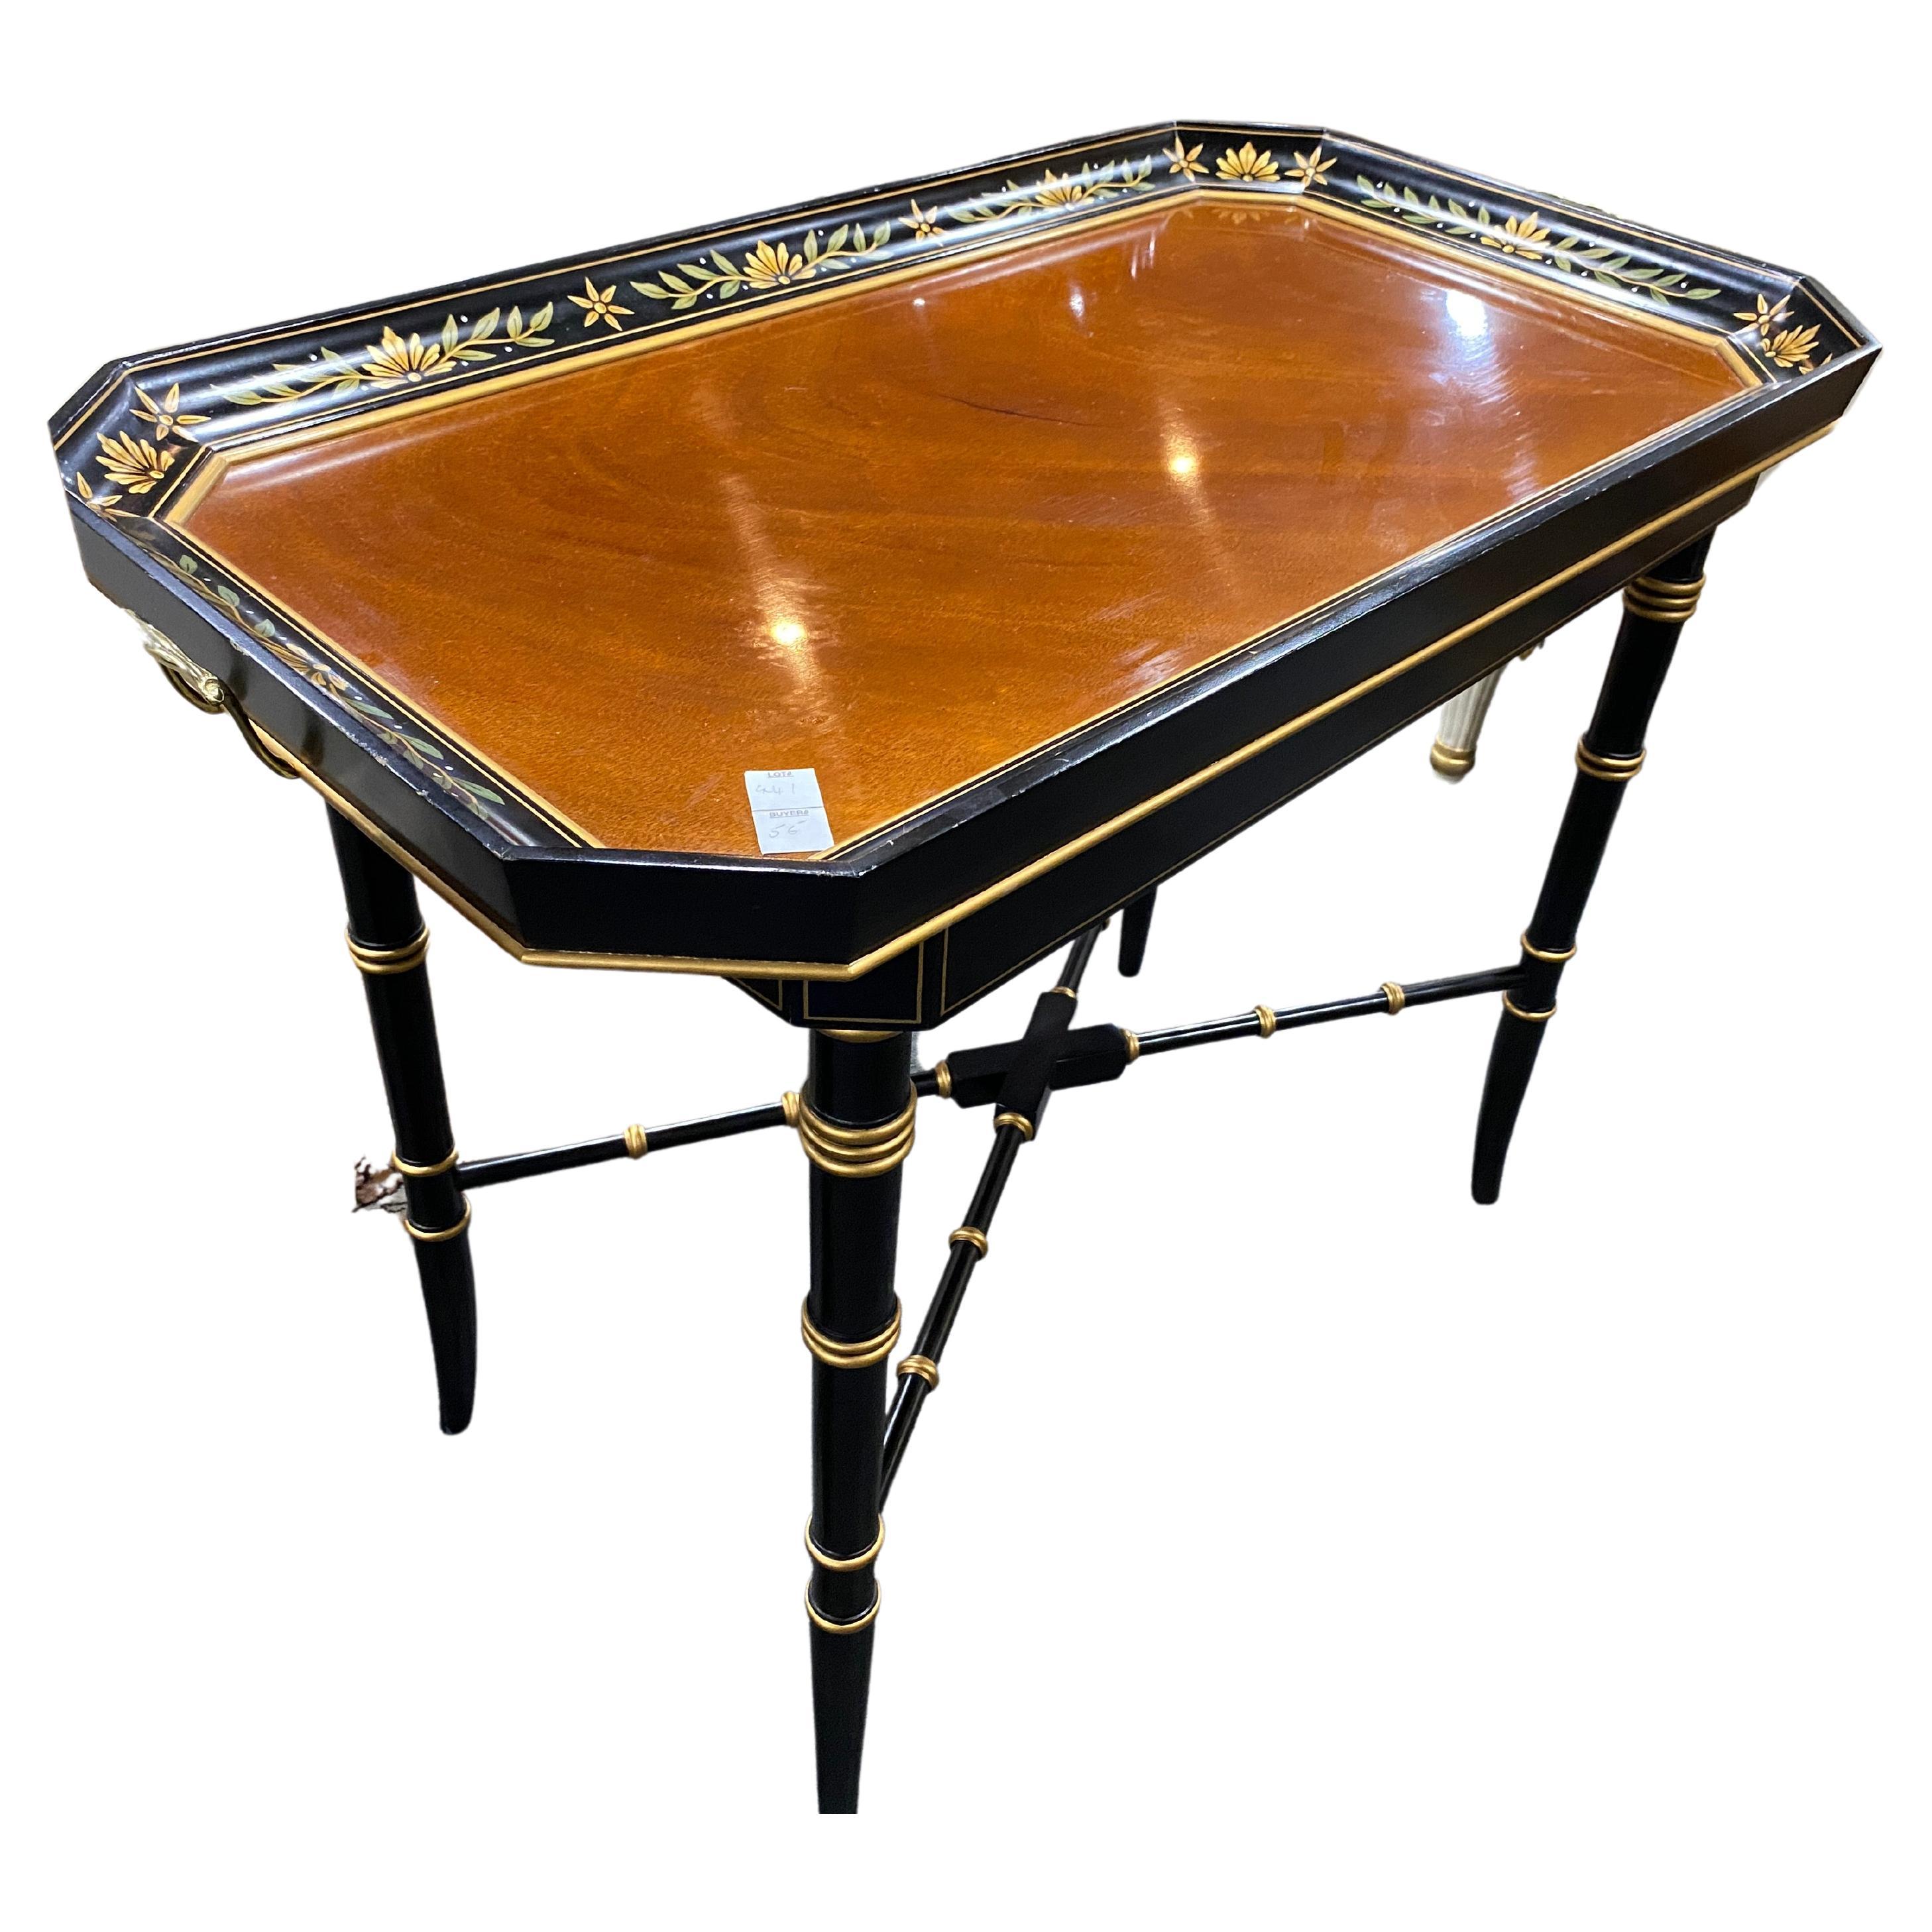 Stunning wooden tray table with faux bamboo leg design. hand painted, brass handles. 

Very good quality Kindel Tea Table, hand painted”
Time Period Manufactured
Post-1950 Original

Stylish wooden tray table accentuated with hand painted leaf